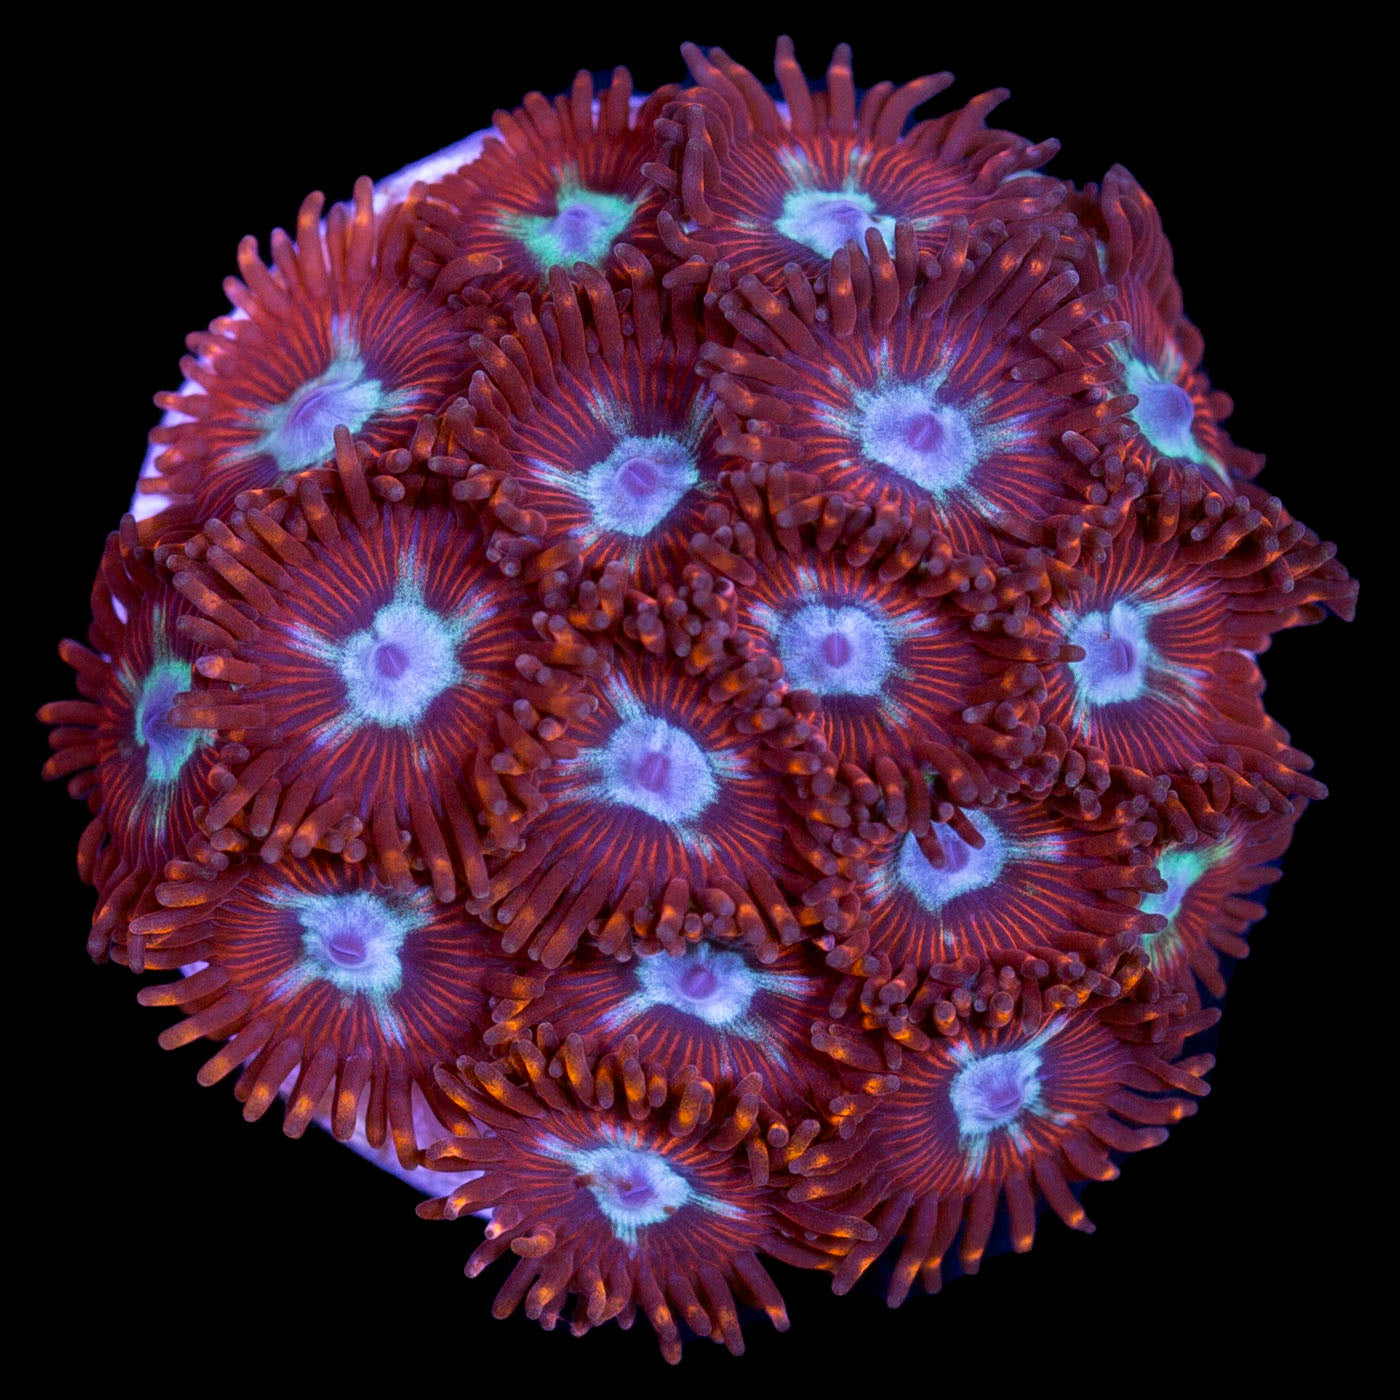 Vivid's P-Star Zoanthid Coral